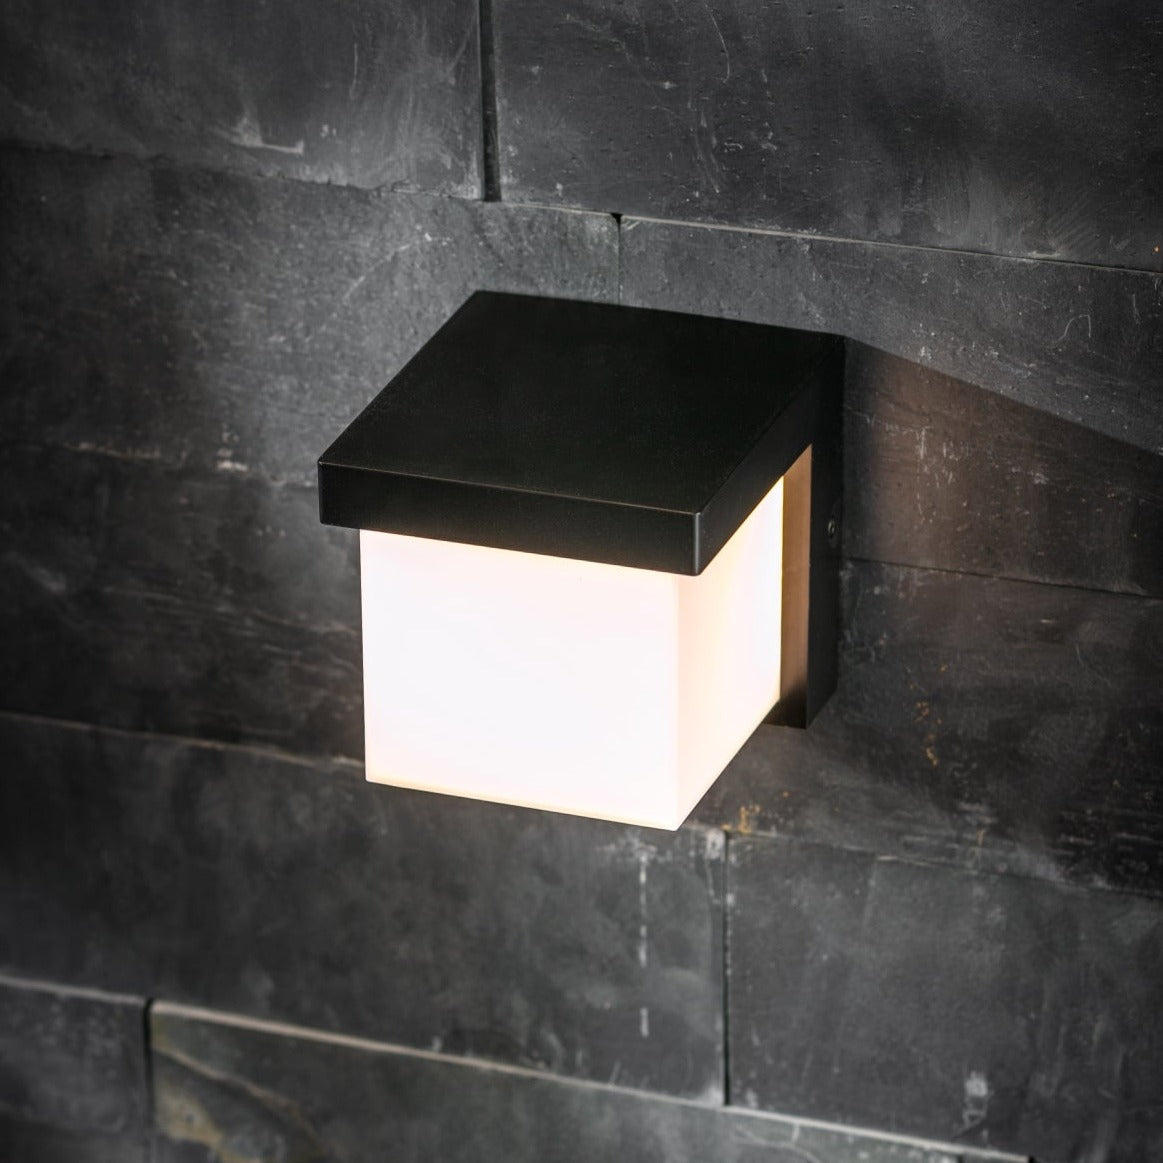 Our Addison black plastic ABS plastic outdoor wall mounted square outdoor light with built in LED's would look perfect in a modern or more traditional home design. Outside wall lights can provide atmospheric light in your garden, at the front door or on the terrace as well as a great security solution. It is designed for durability and longevity with its robust material producing a fully weatherproof and water resistant light fitting.